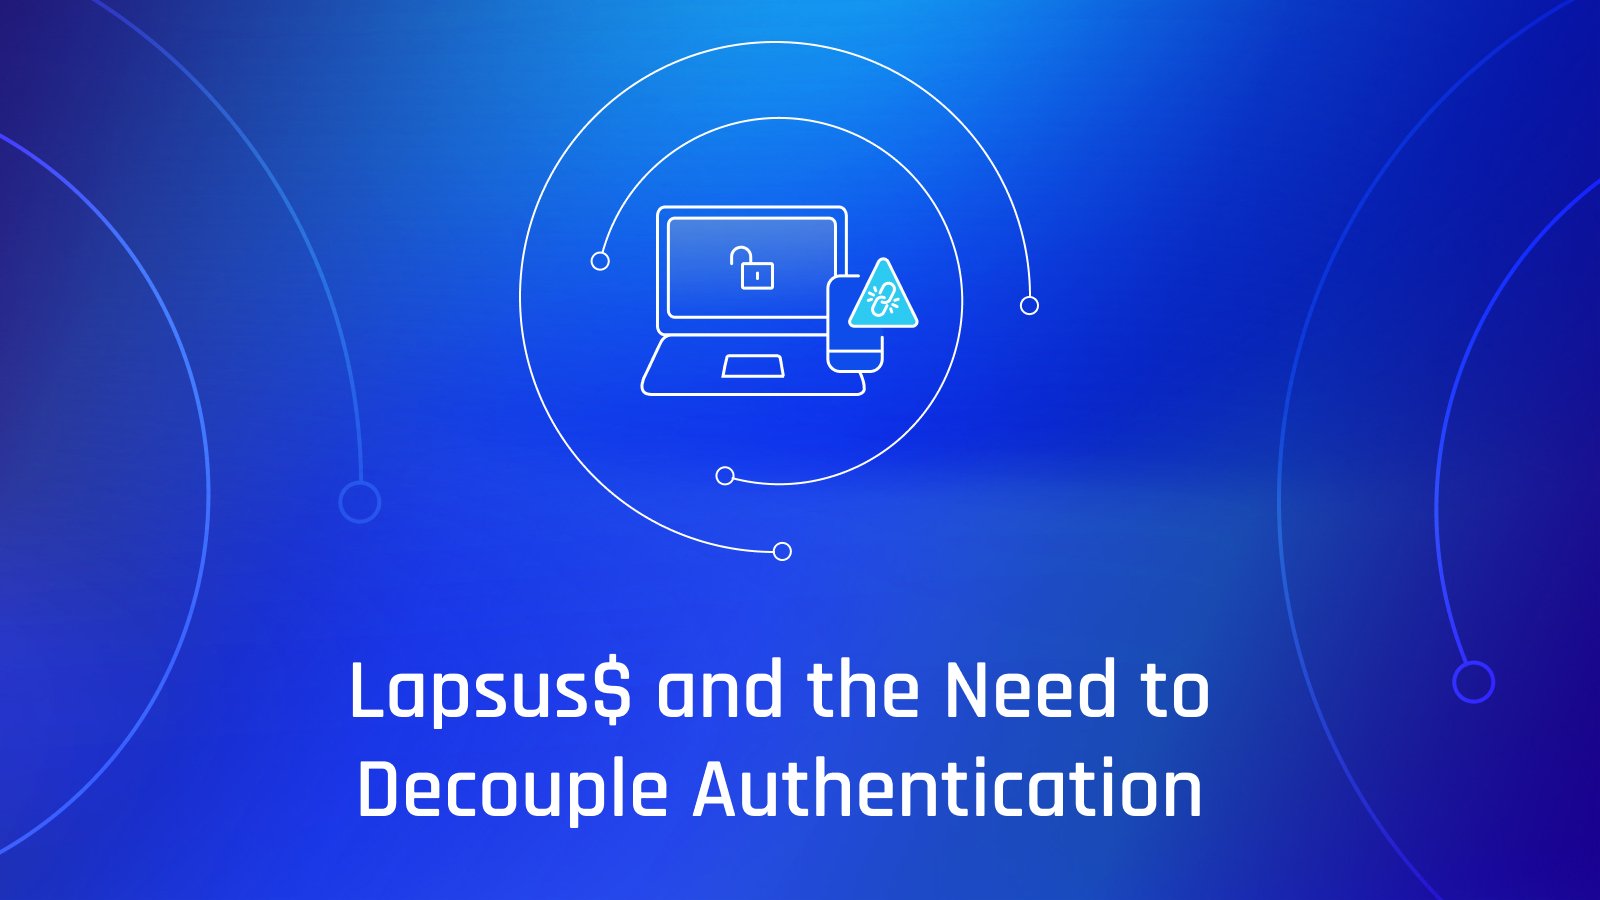 Lapsus$ and the Benefits of Decoupling Authentication